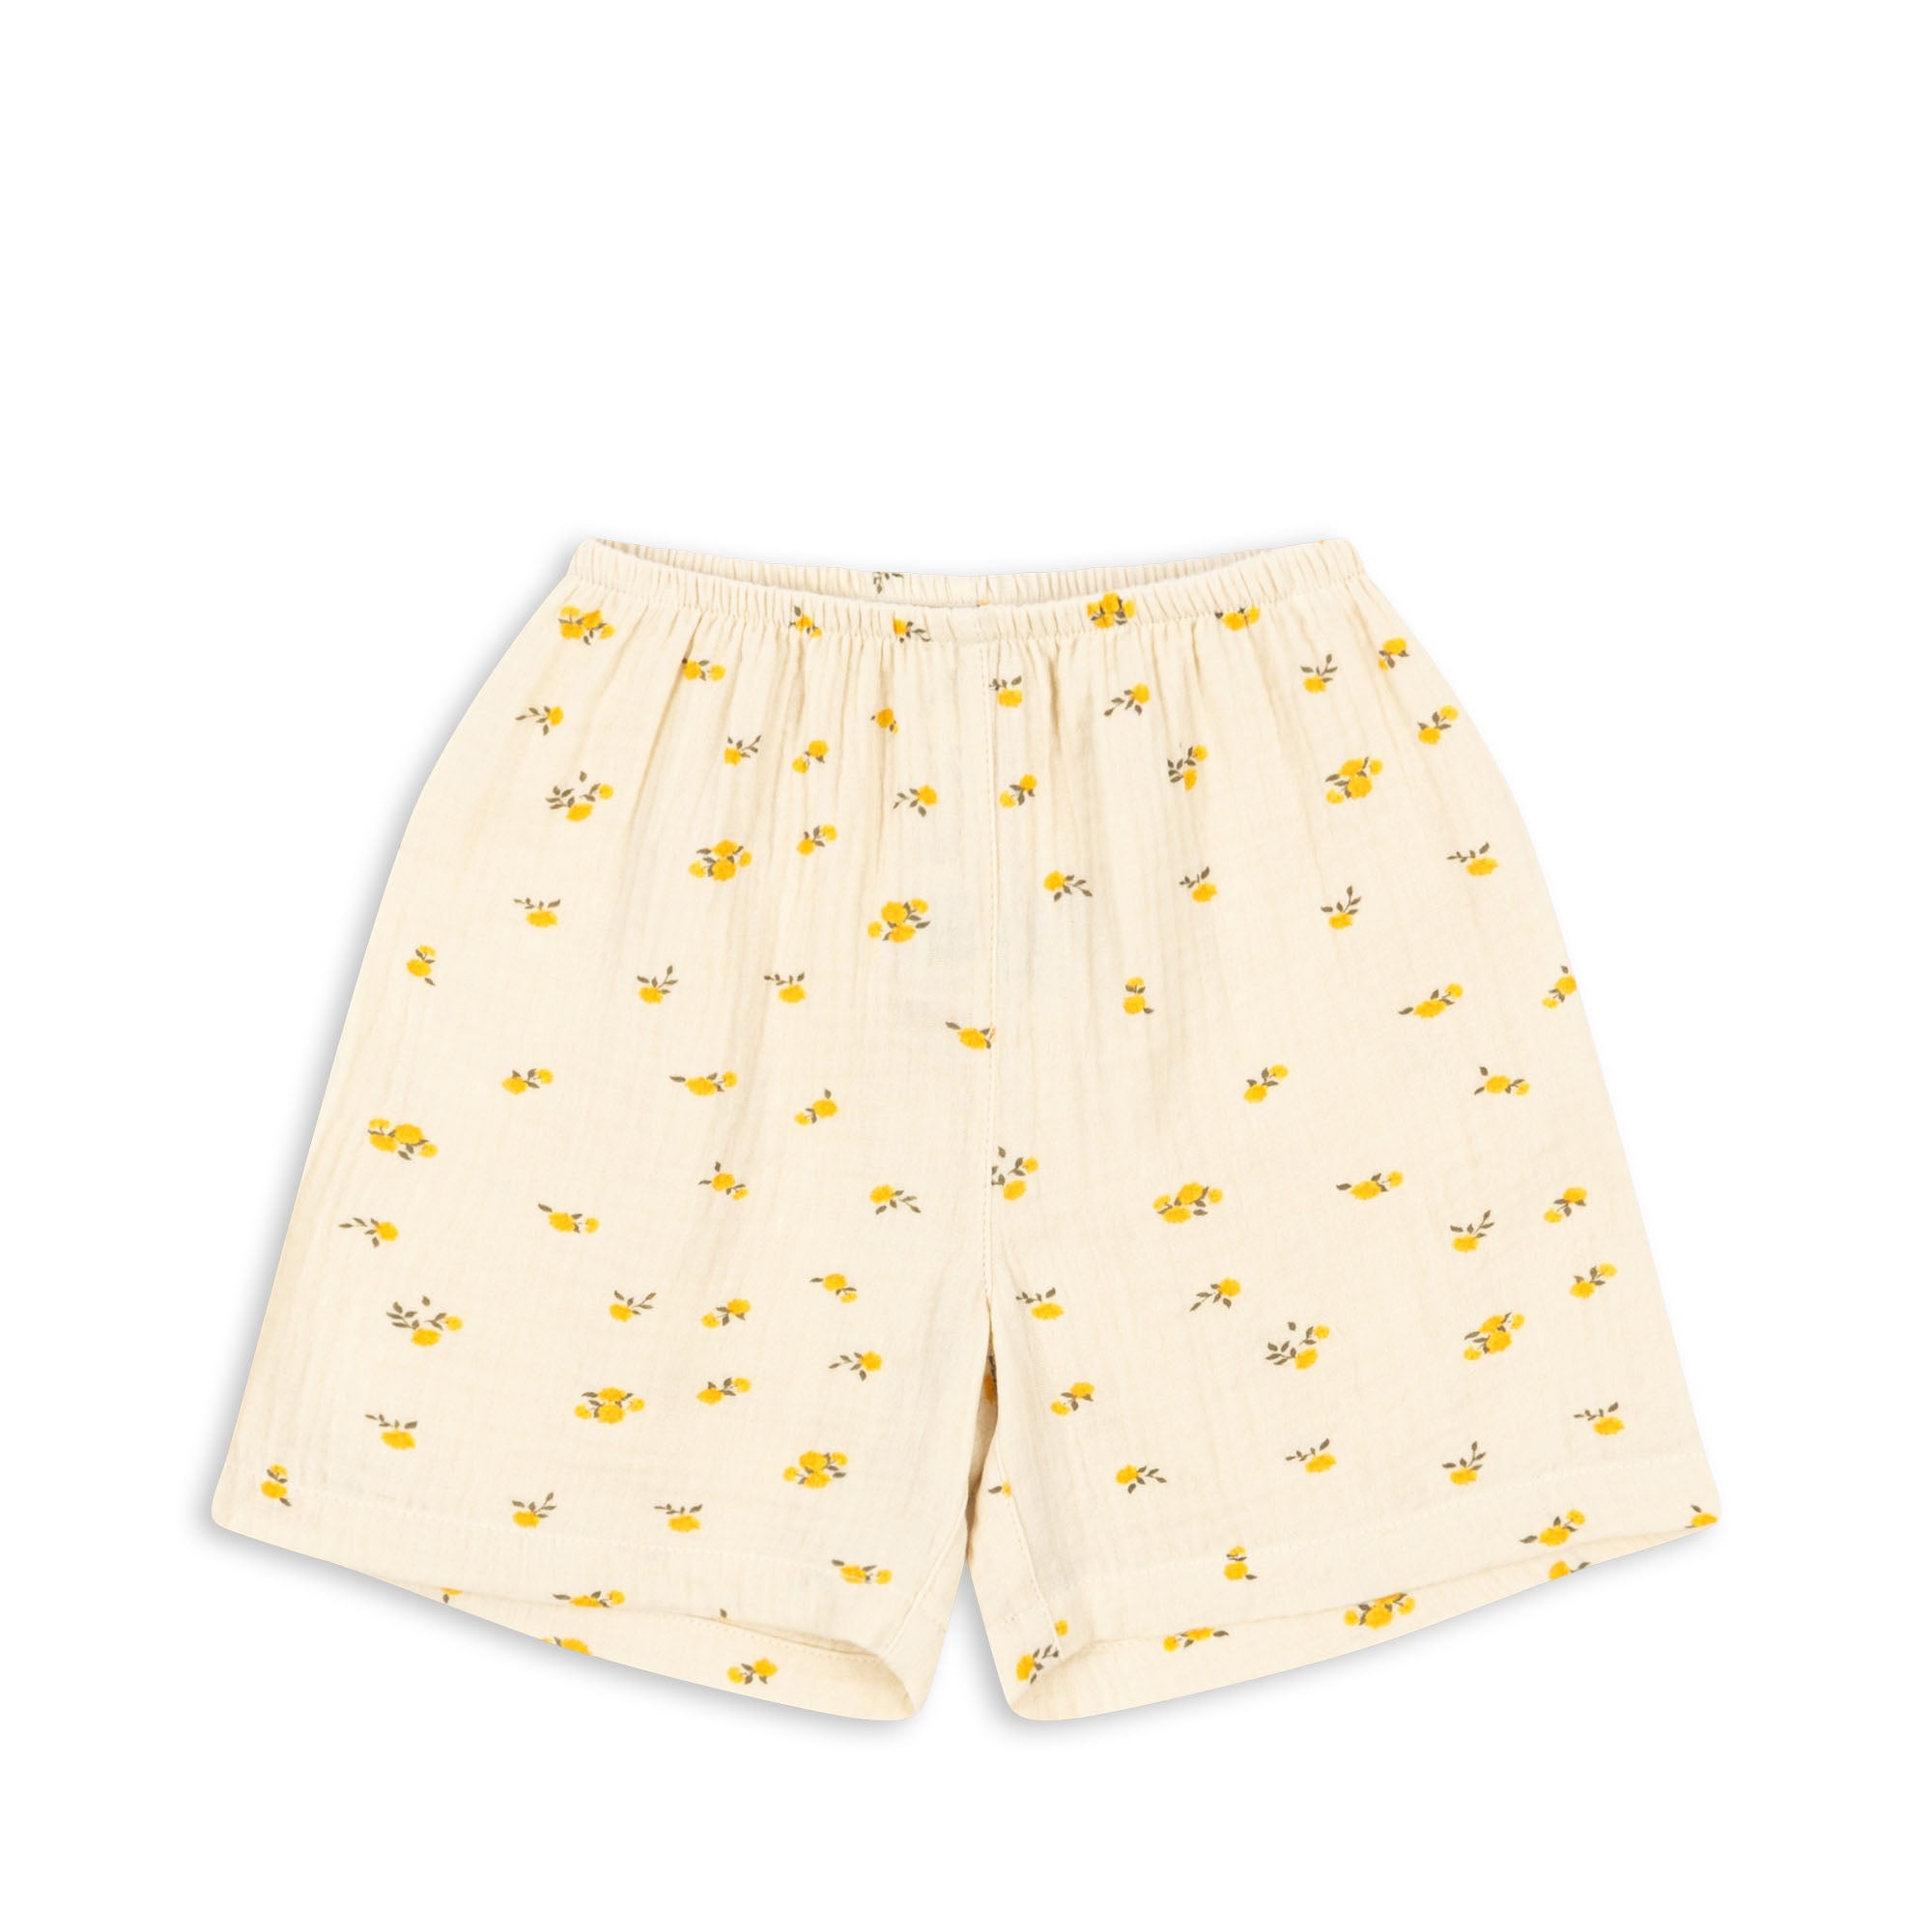 Konges Sløjd A/S COCO SHORTS Shorts and bloomers - Woven BONDEROSE SOLEIL